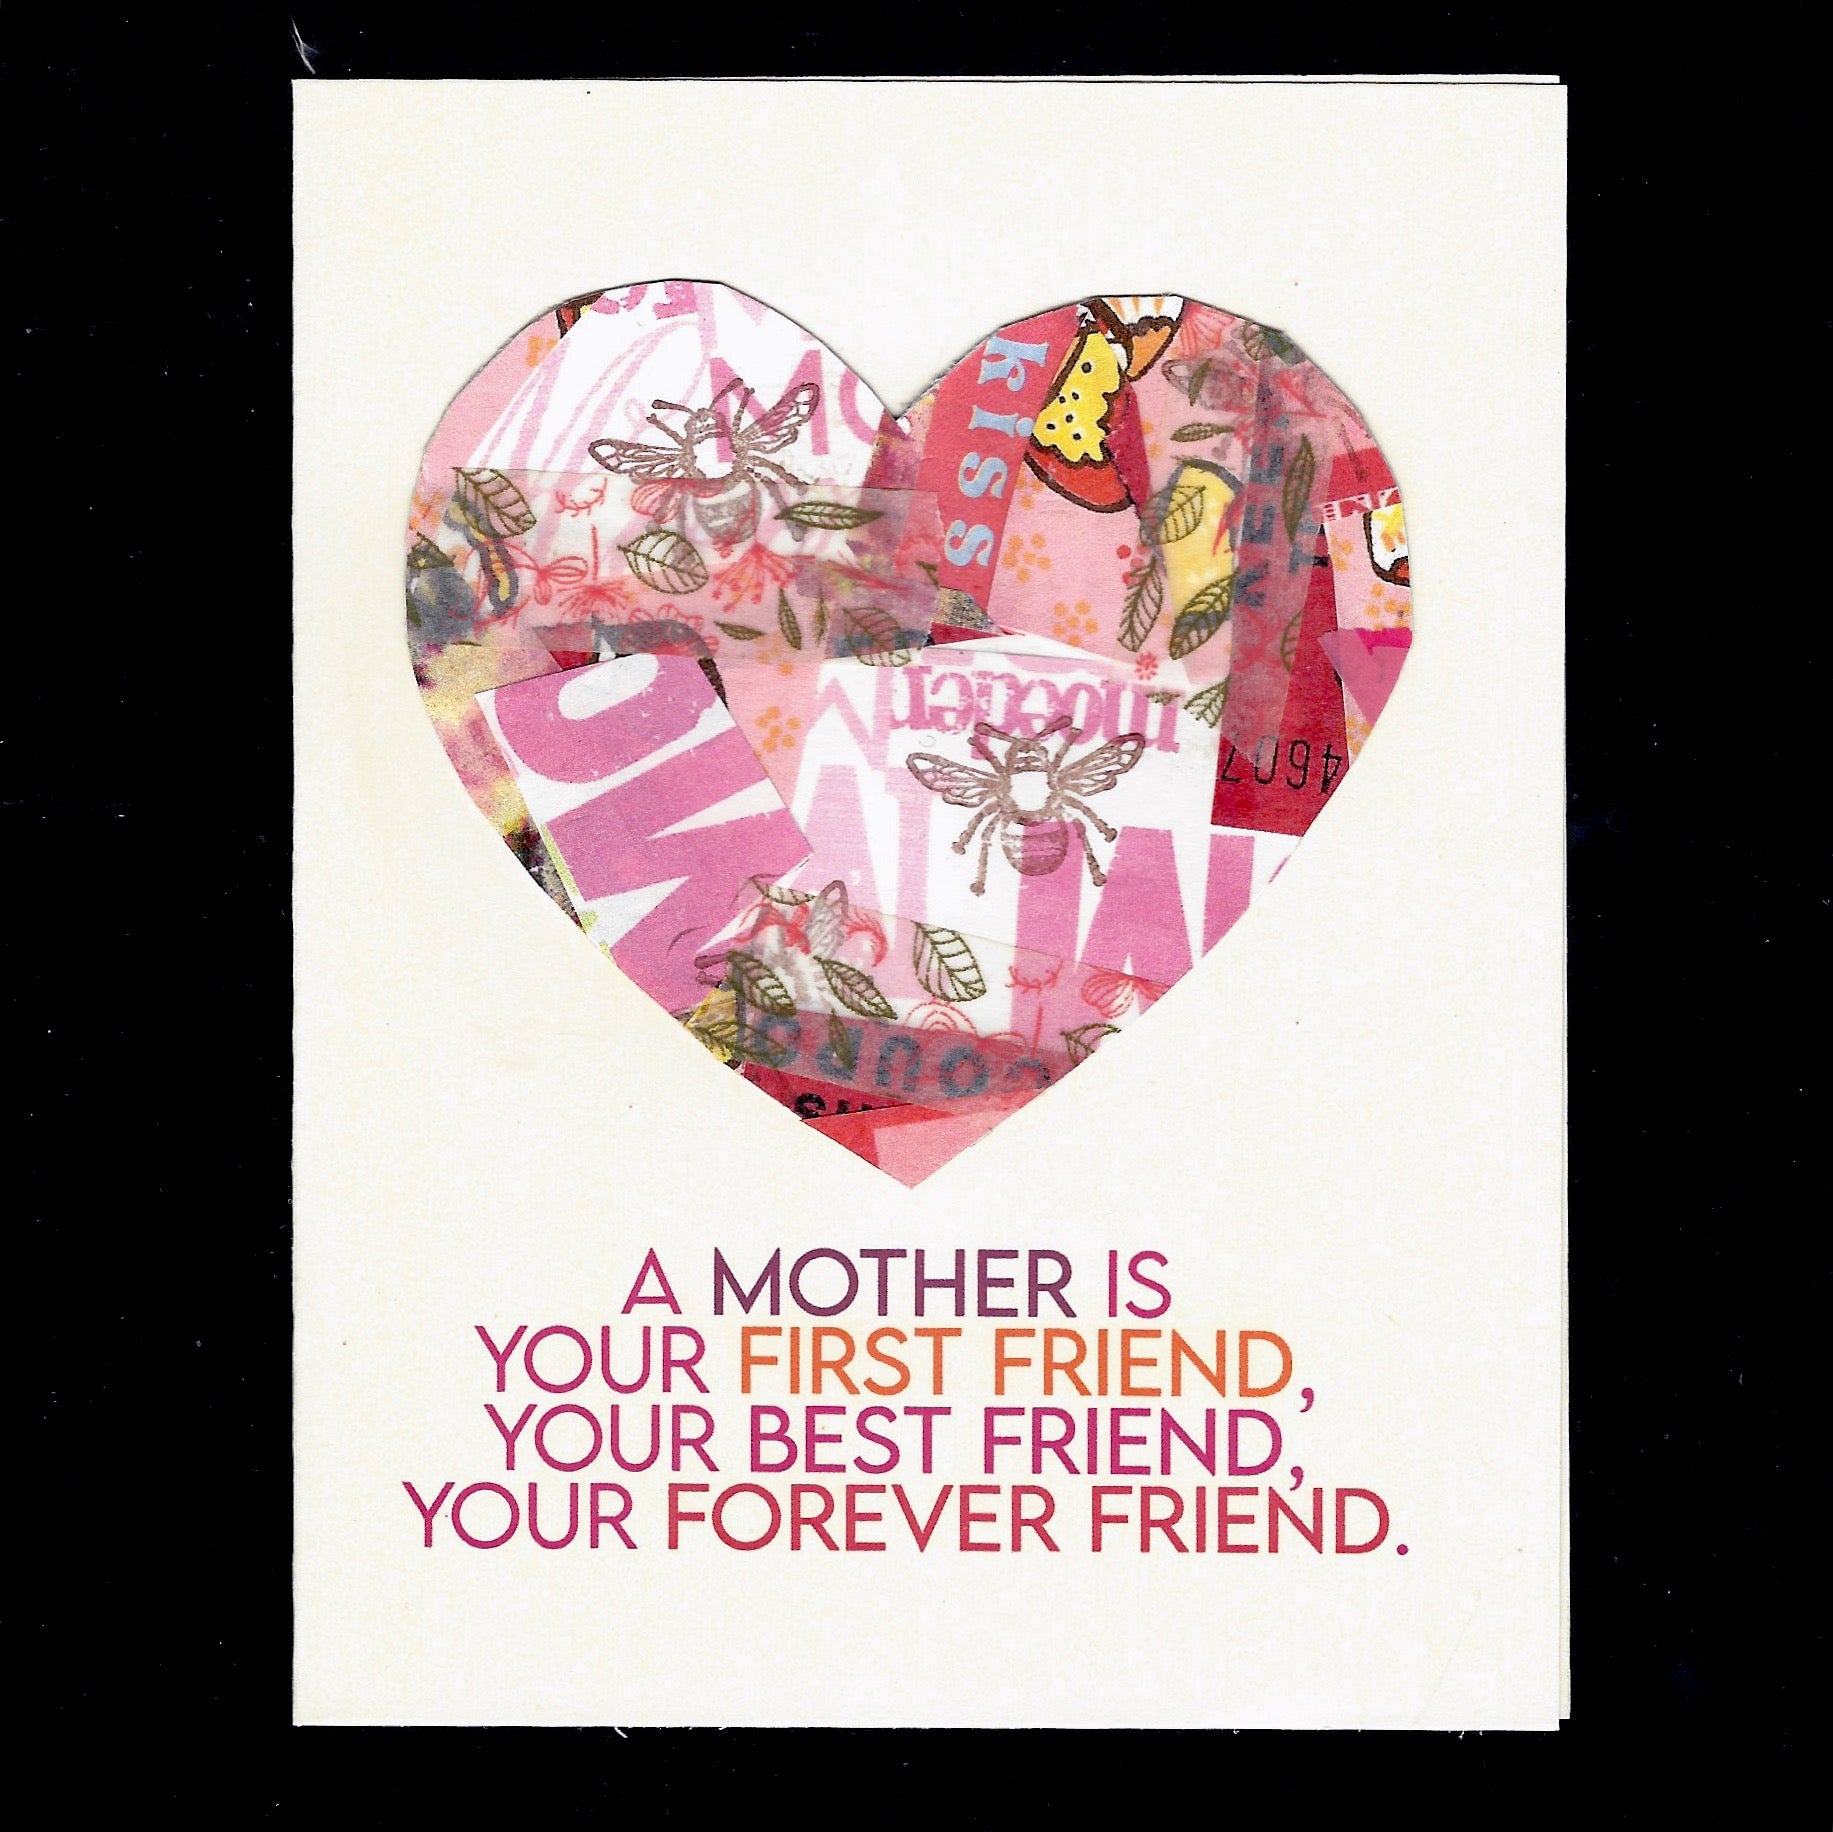 'A mother is your first friend, your best friend, your forever friend.' card Virginia Fitzgerald